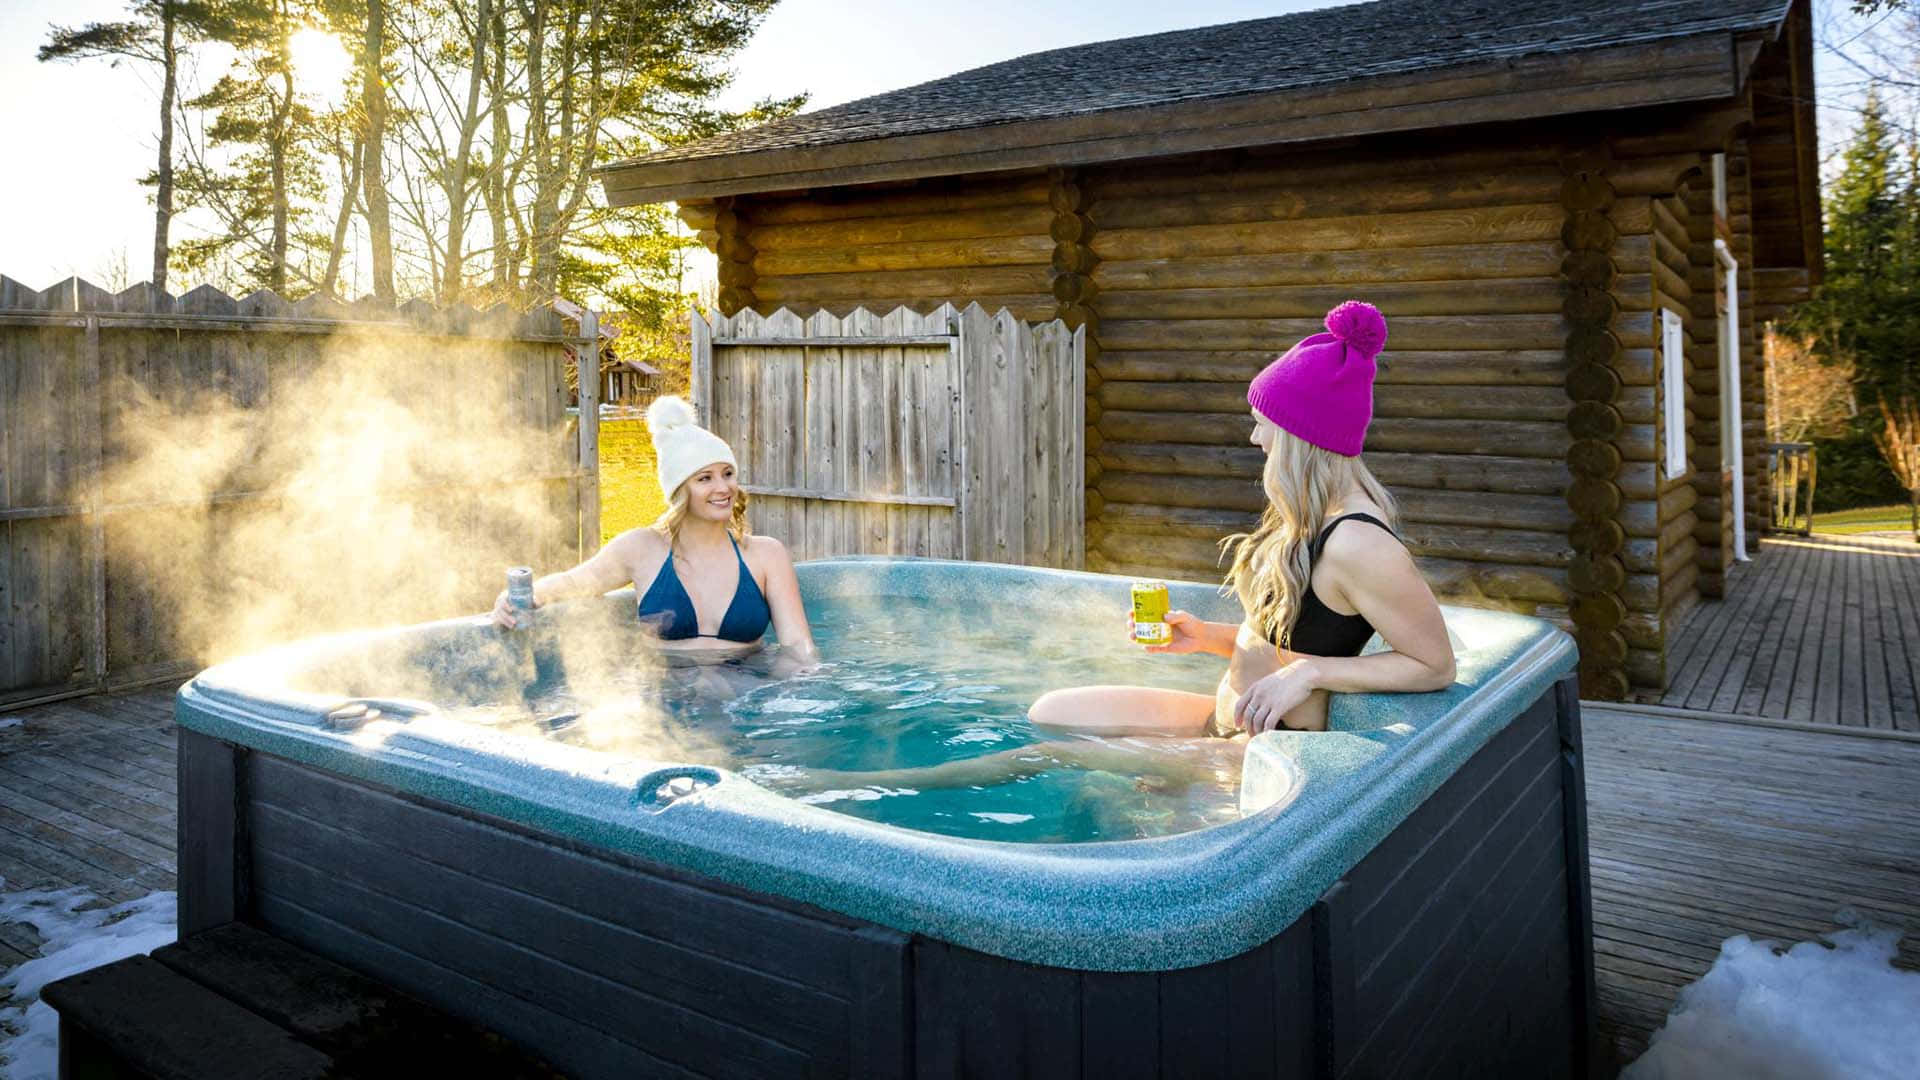 Winter Hot Tub Relaxation Wallpaper